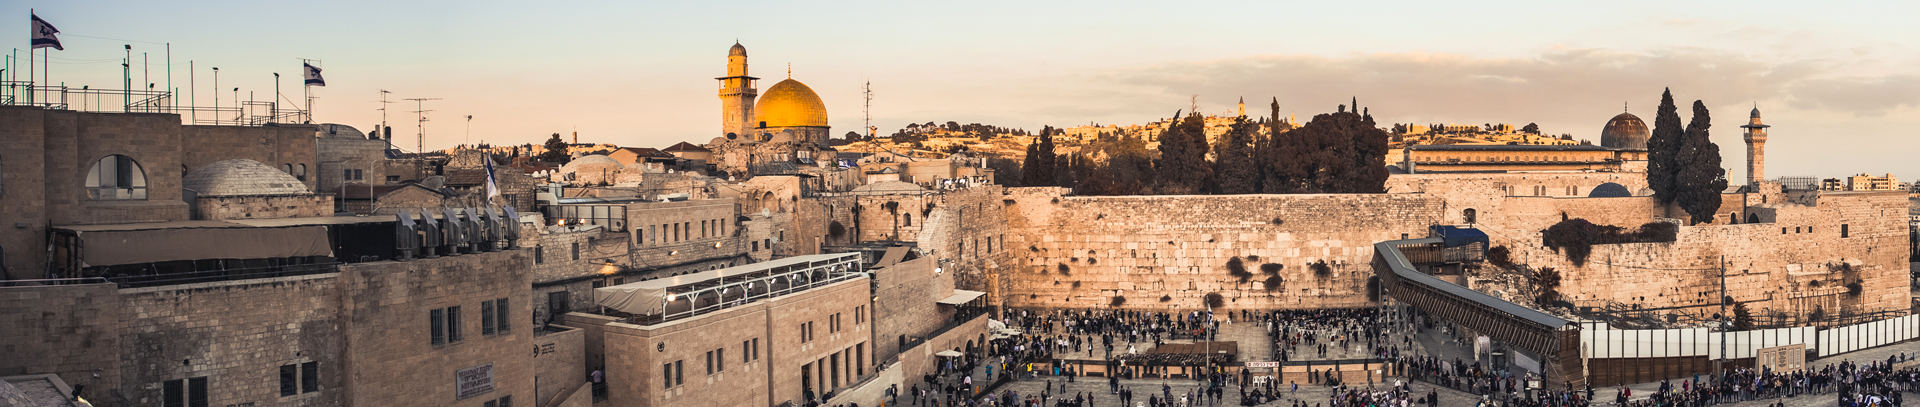 Orthodox Group Tours to Israel - Western Wall